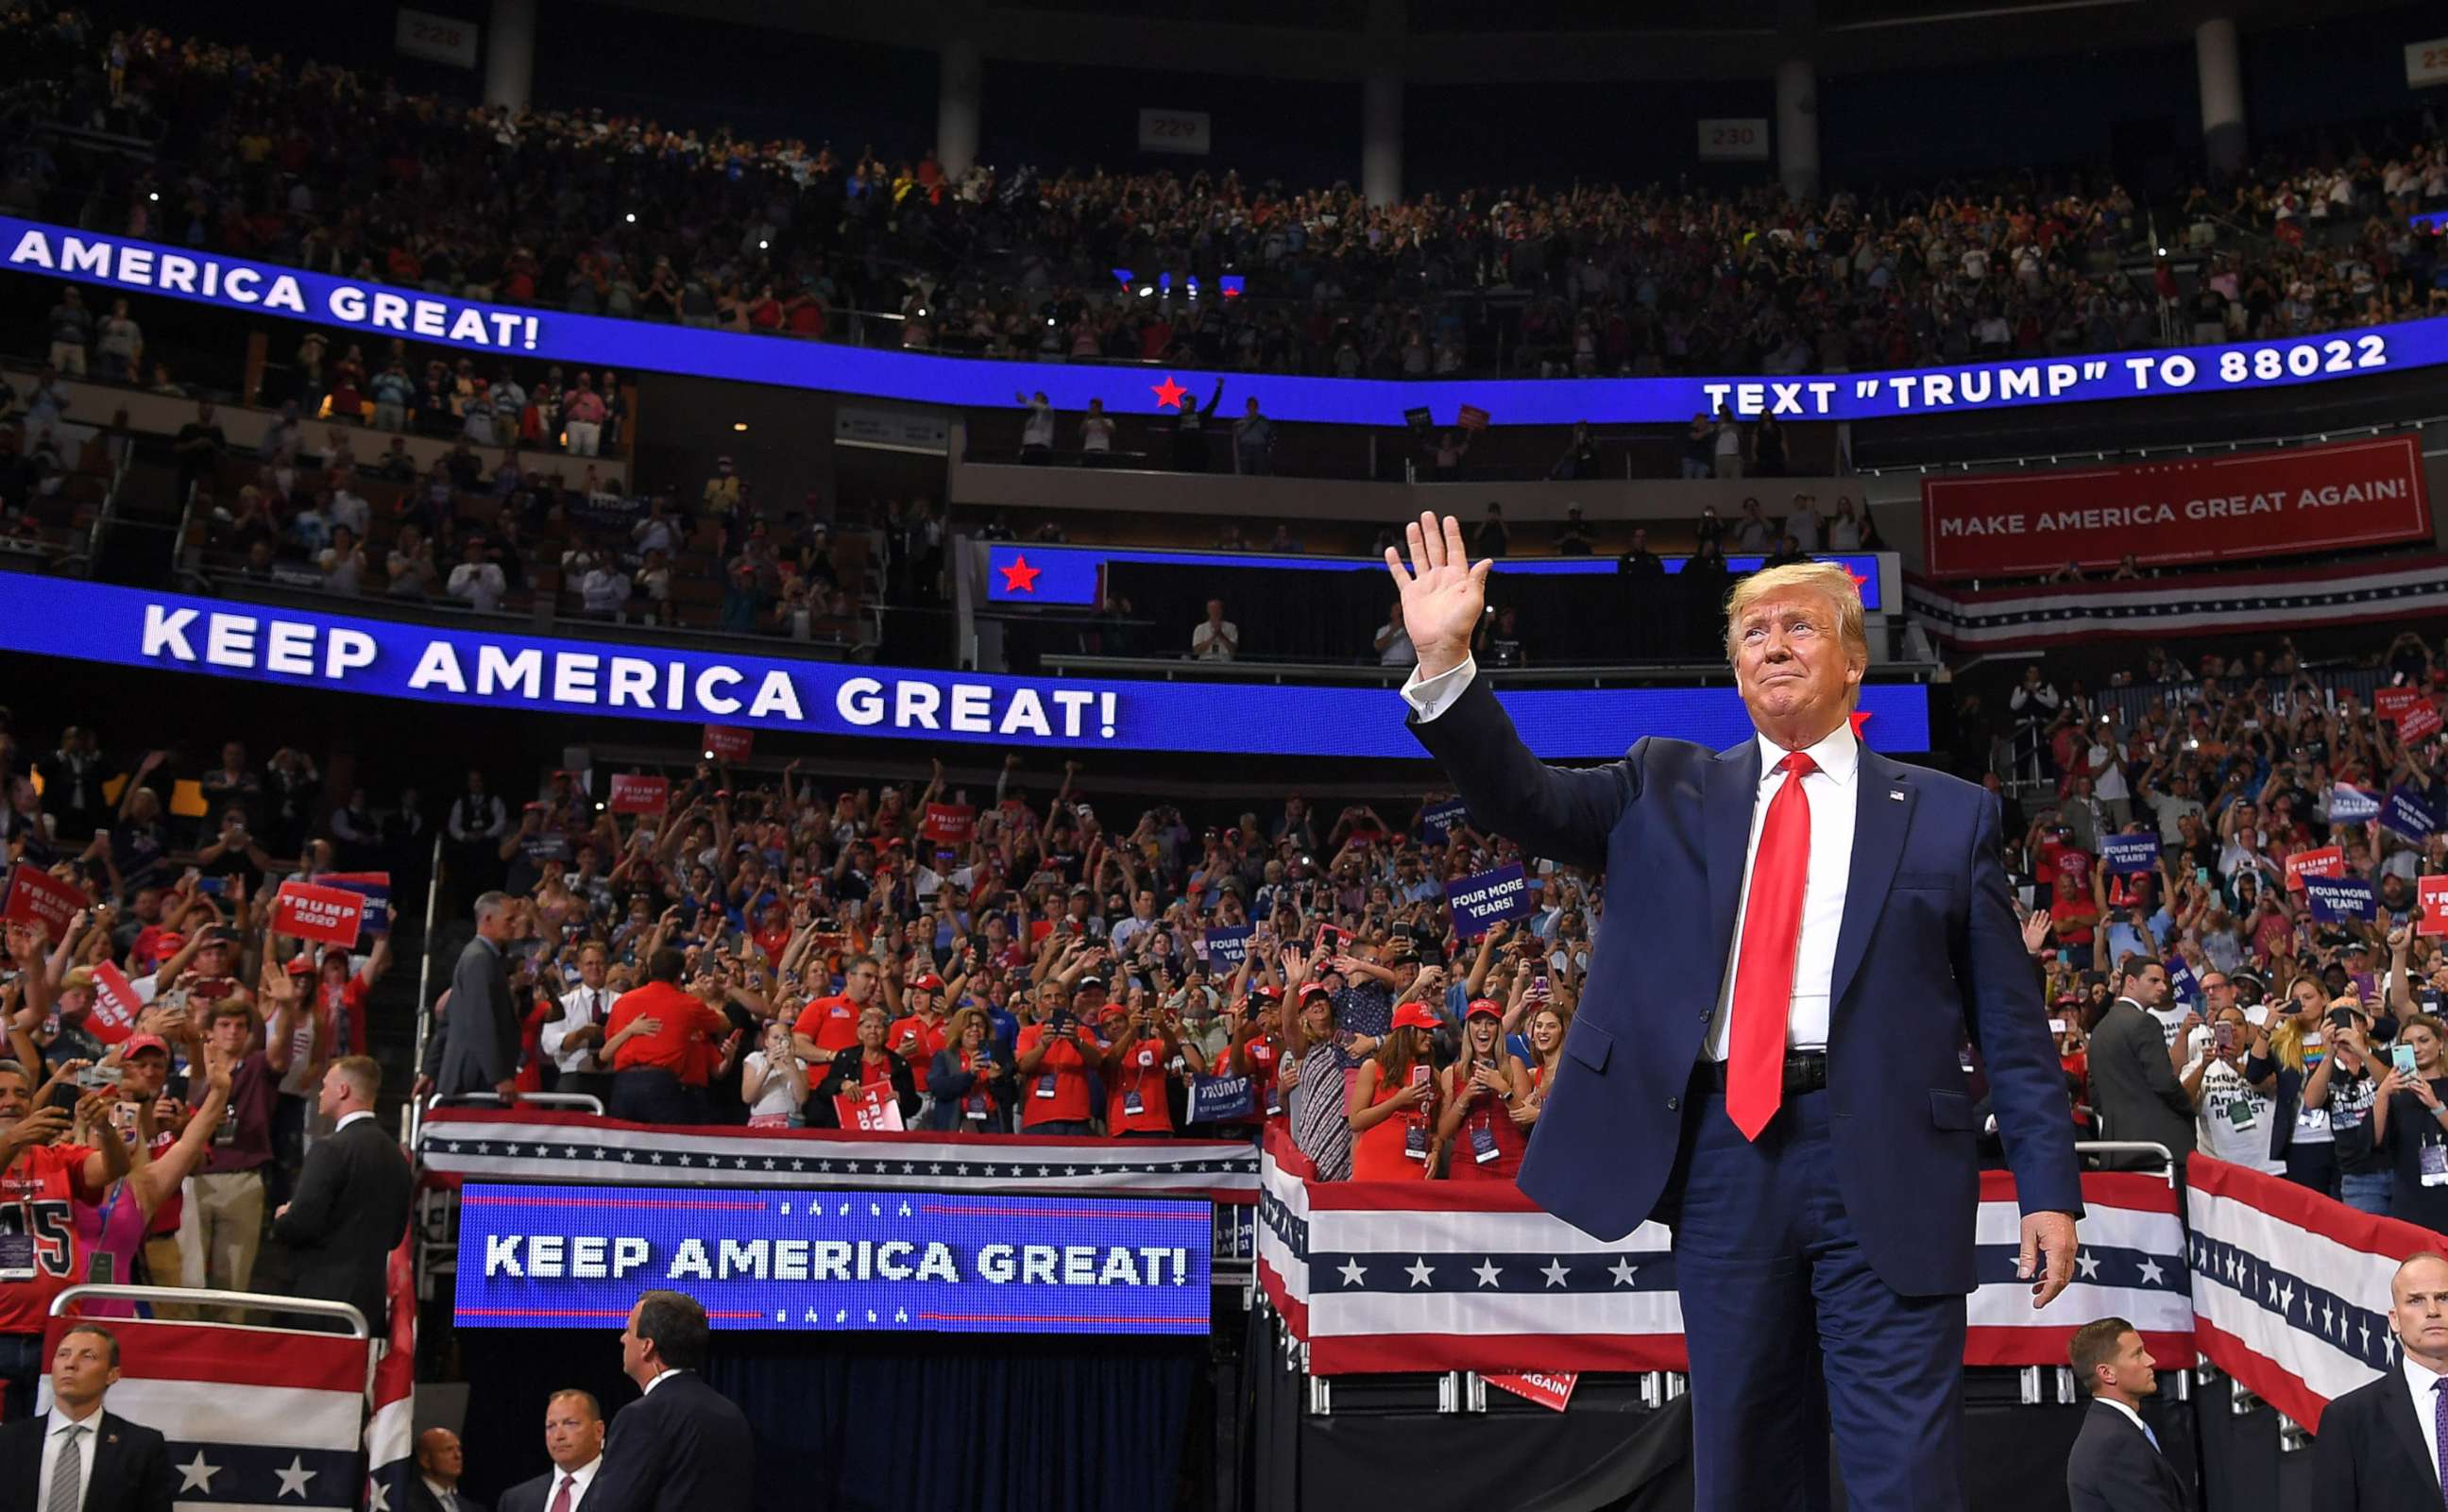 PHOTO: In this file photo, President Donald Trump arrives to speak during a rally at the Amway Center in Orlando, Fla. to officially launch his 2020 campaign on June 18, 2019.